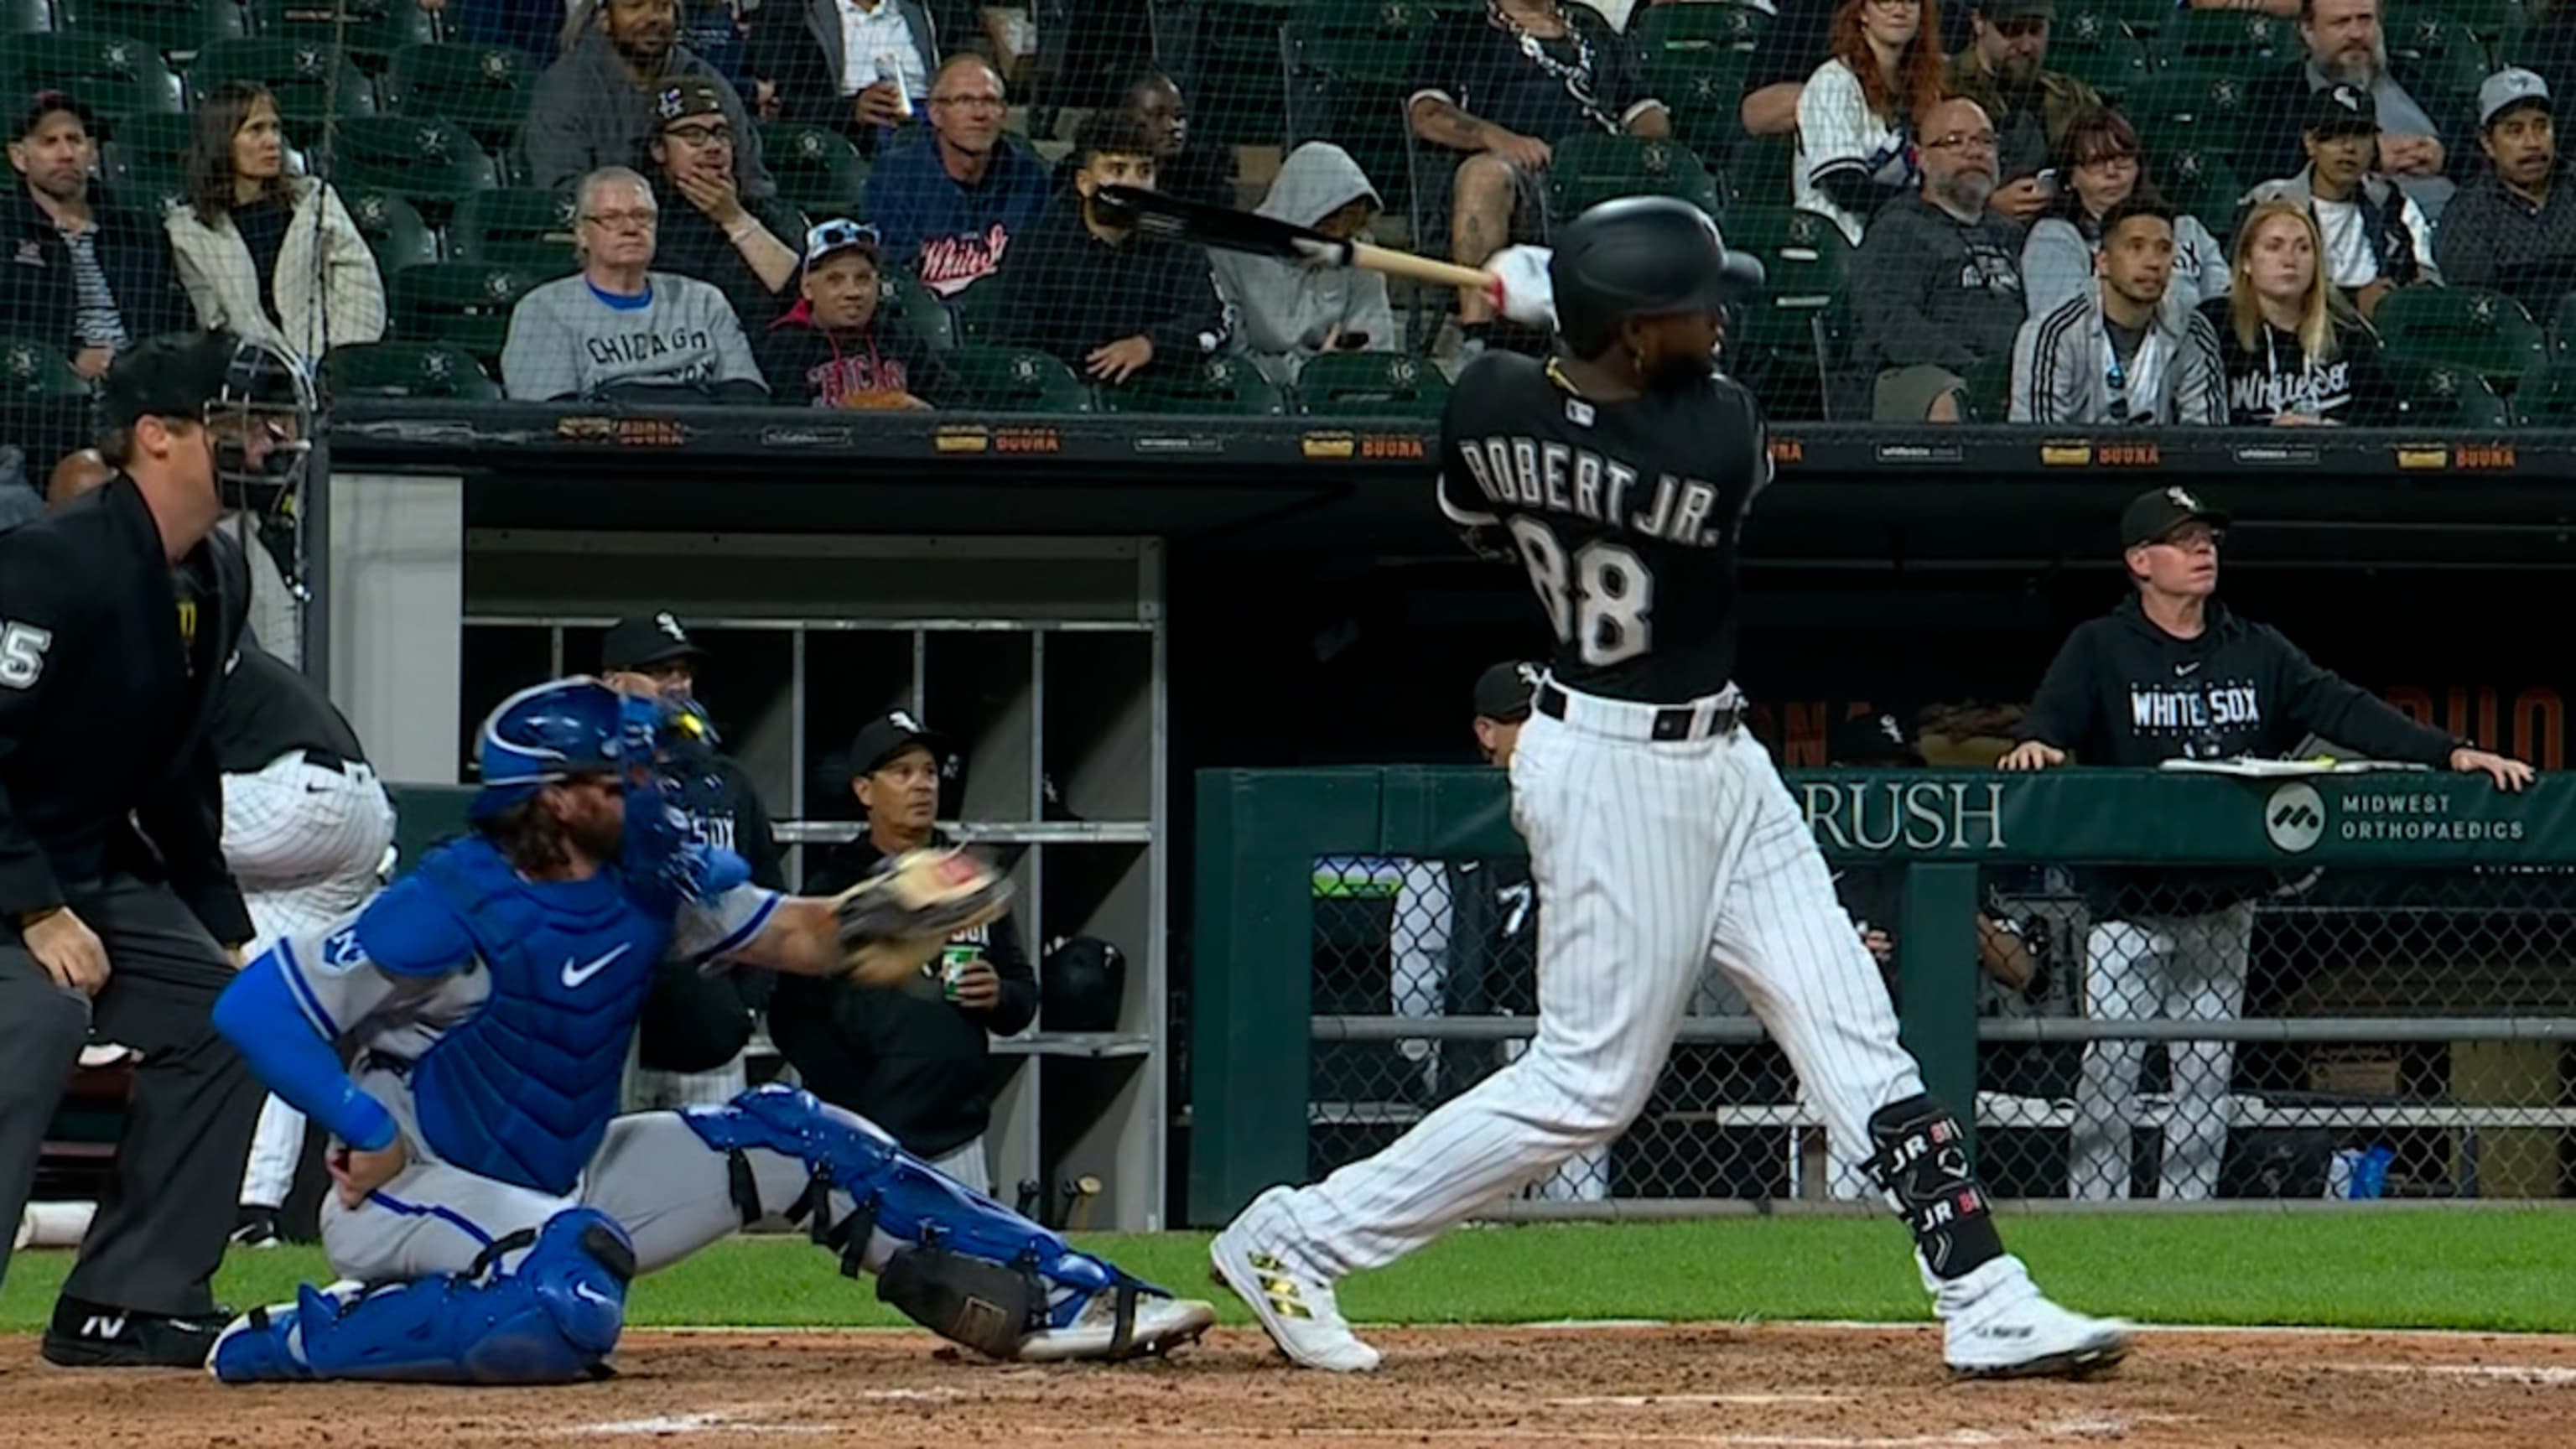 White Sox belt 3 homers vs. Royals — 2 by Gavin Sheets — but lose